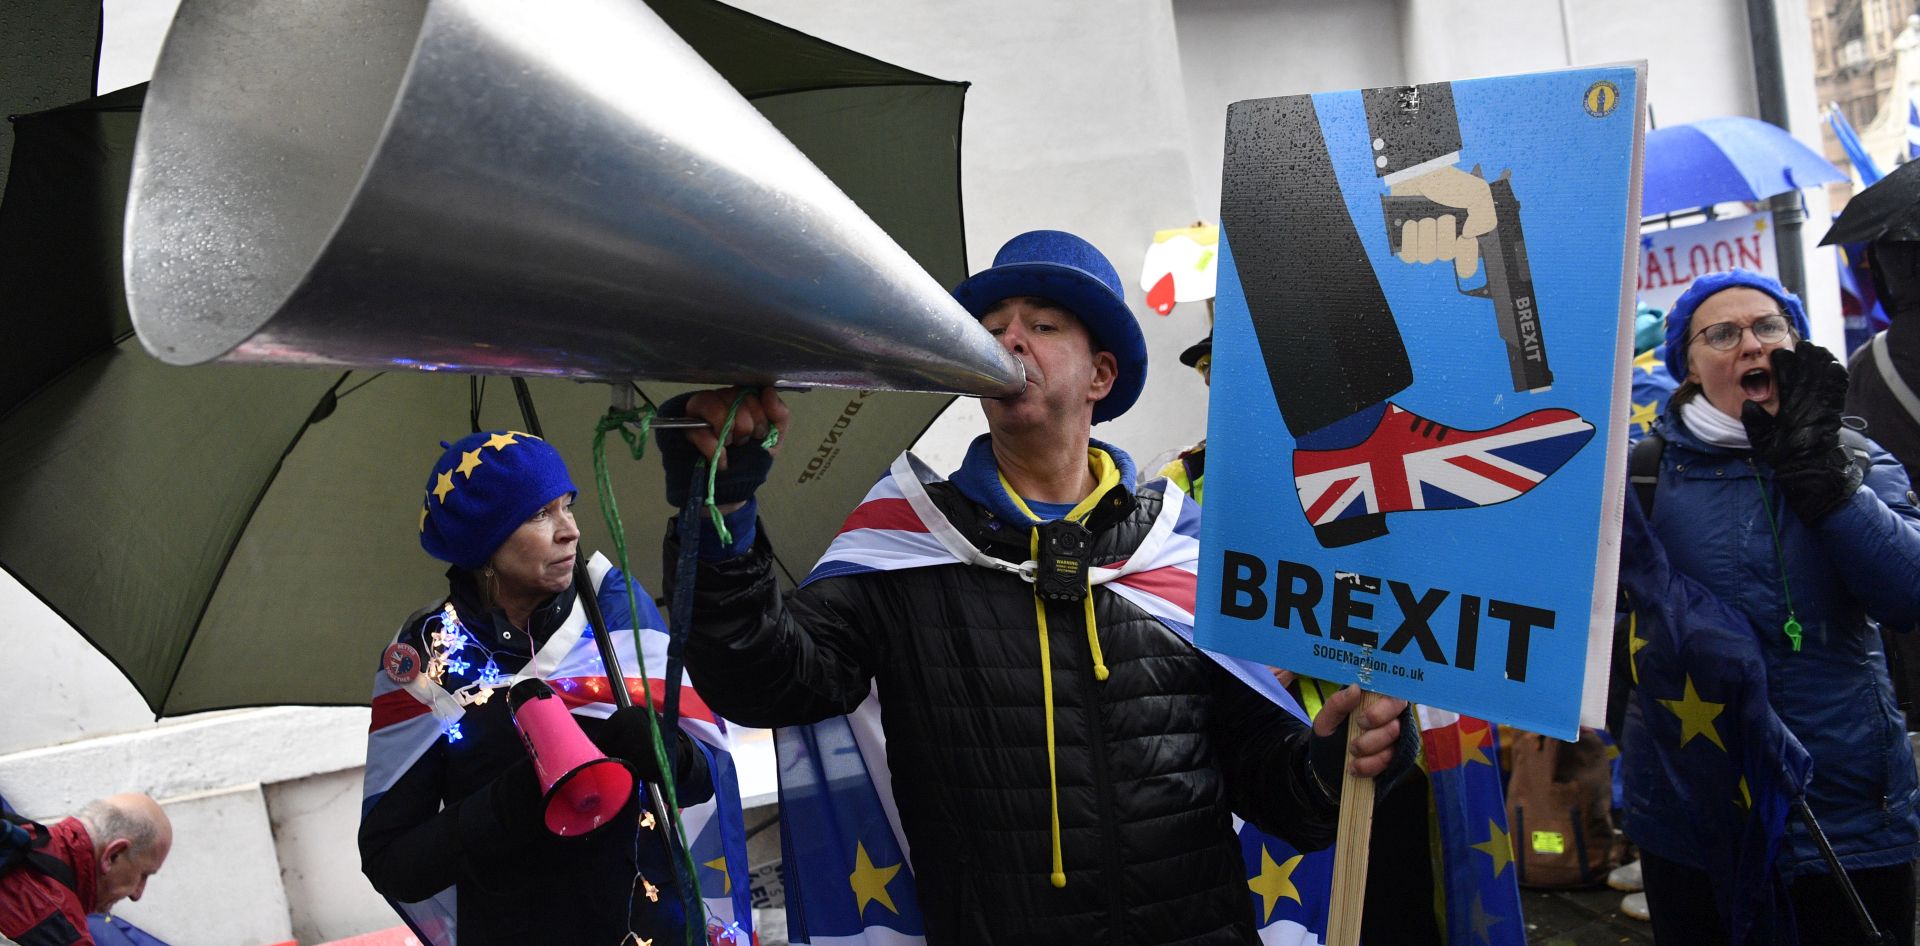 epa07431596 Pro-remain protesters rally outside parliament in London, Britain, 12 March 2019. British parliament will vote on British Prime Minister May's amended Brexit deal later in the day. Theresa May wants parliament to back her 'improved' withdrawal agreement she has negotiated with the EU over the so-called 'backstop'. The United Kingdom is officially due to leave the European Union on 29 March 2019, two years after triggering Article 50 in consequence to a referendum.  EPA/NEIL HALL